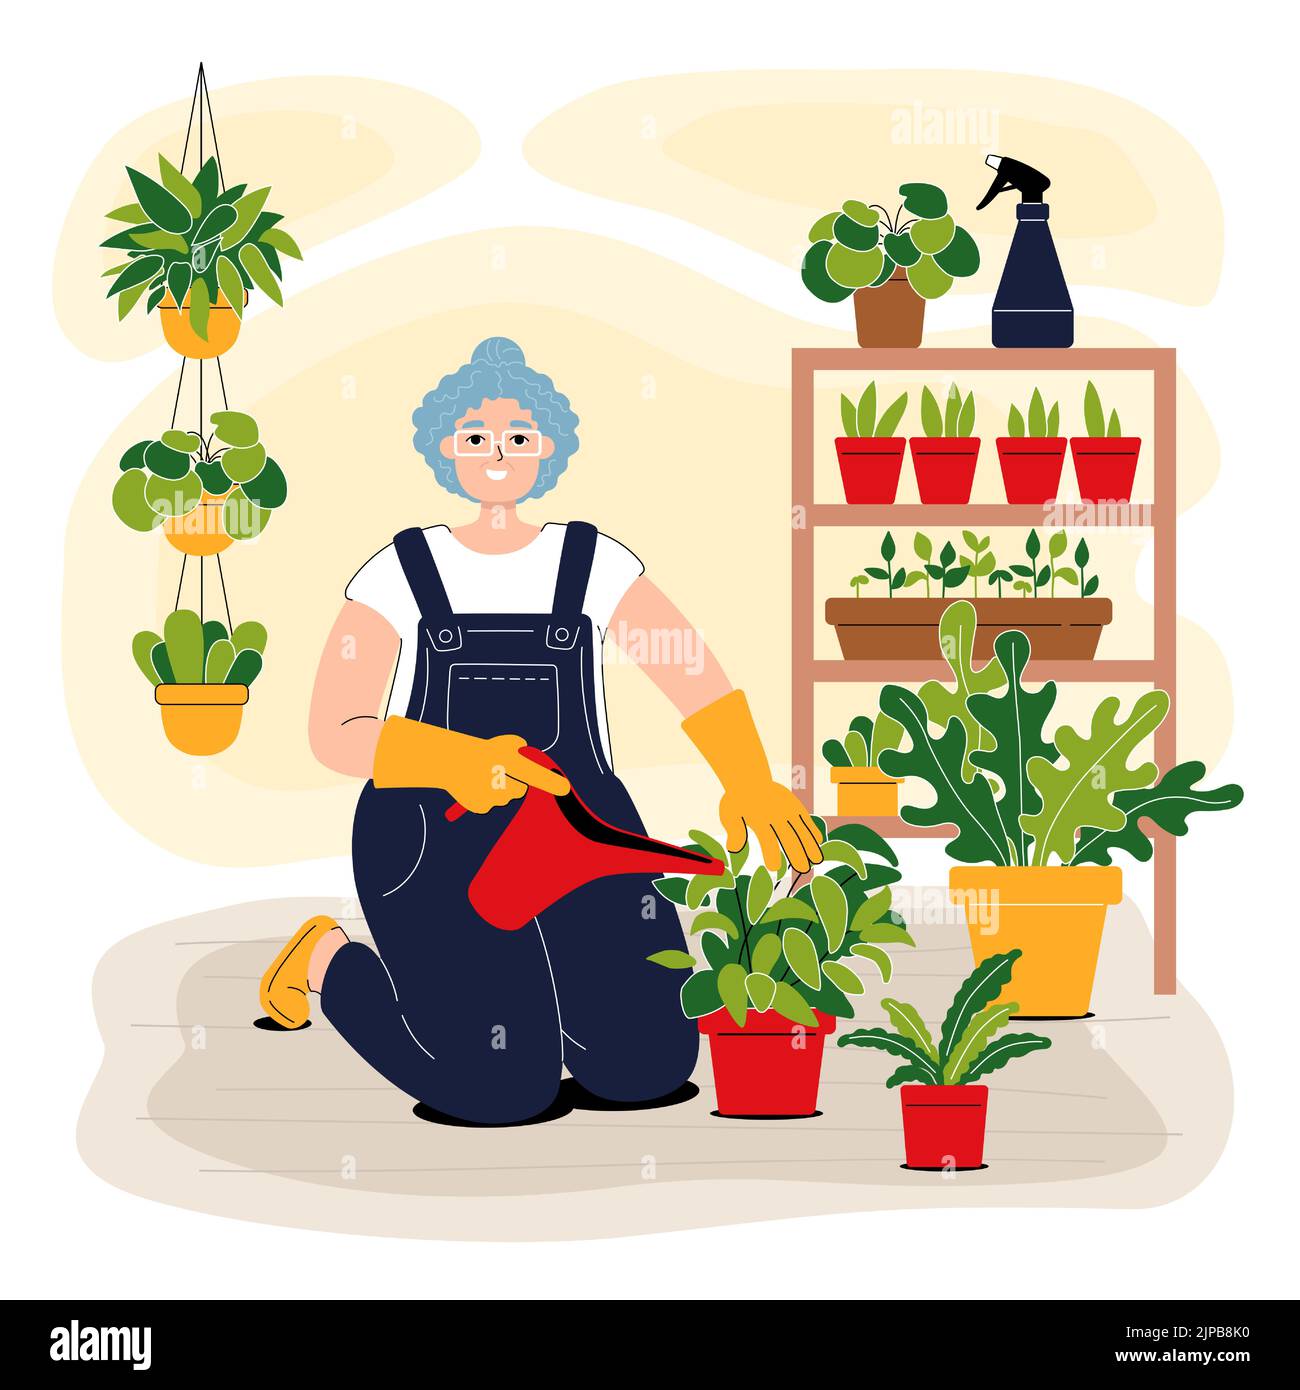 Home gardening character. Smiling elderly gardener watering flowers in a pots. Happy gray-haired woman holding watering can. Flat style illustration. Stock Vector